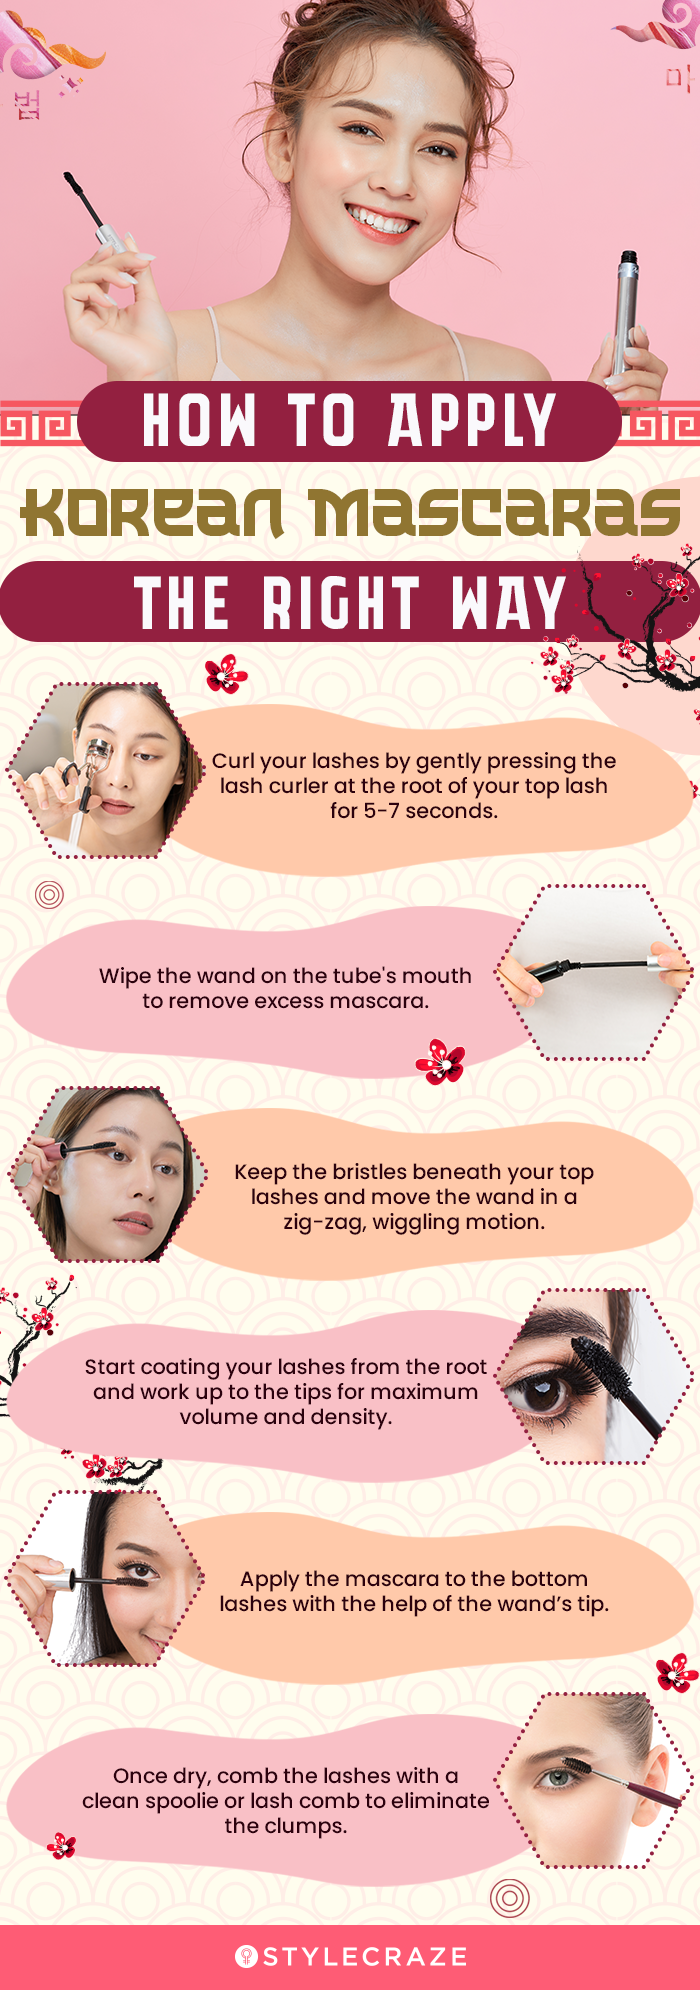 How To Apply Korean Mascaras The Right Way (infographic)